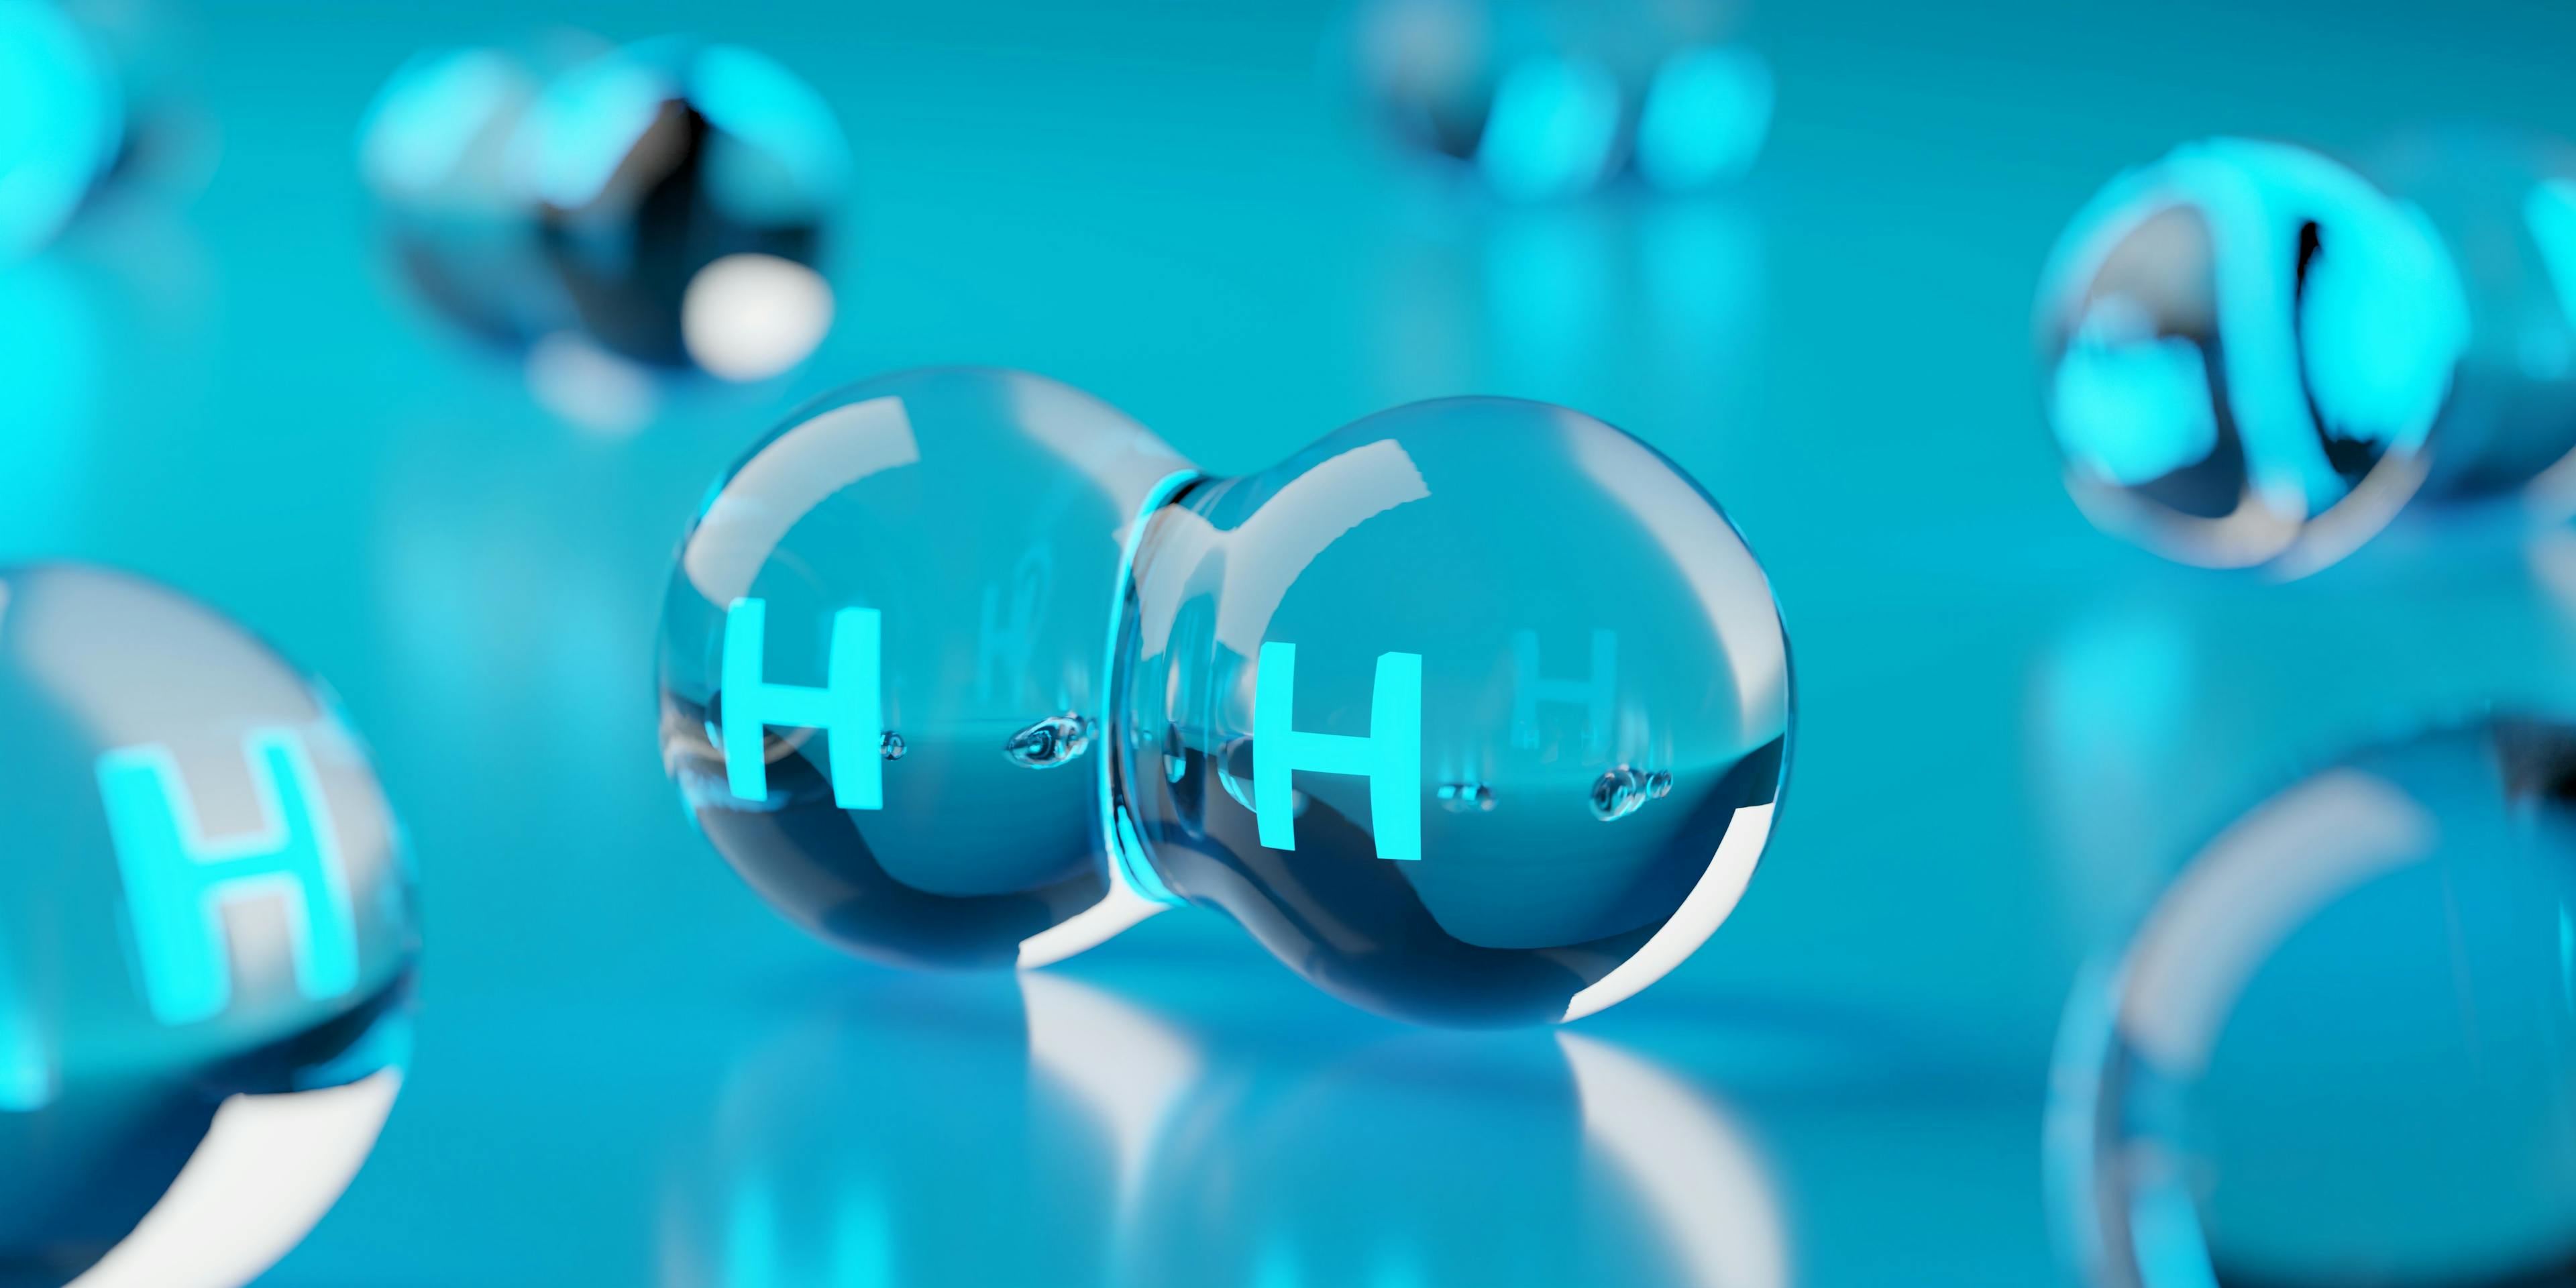 Abstract transparent hydrogen H2 molecules on blue background, clean energy or chemistry concept | Image Credit: © Shawn Hempel - stock.adobe.com